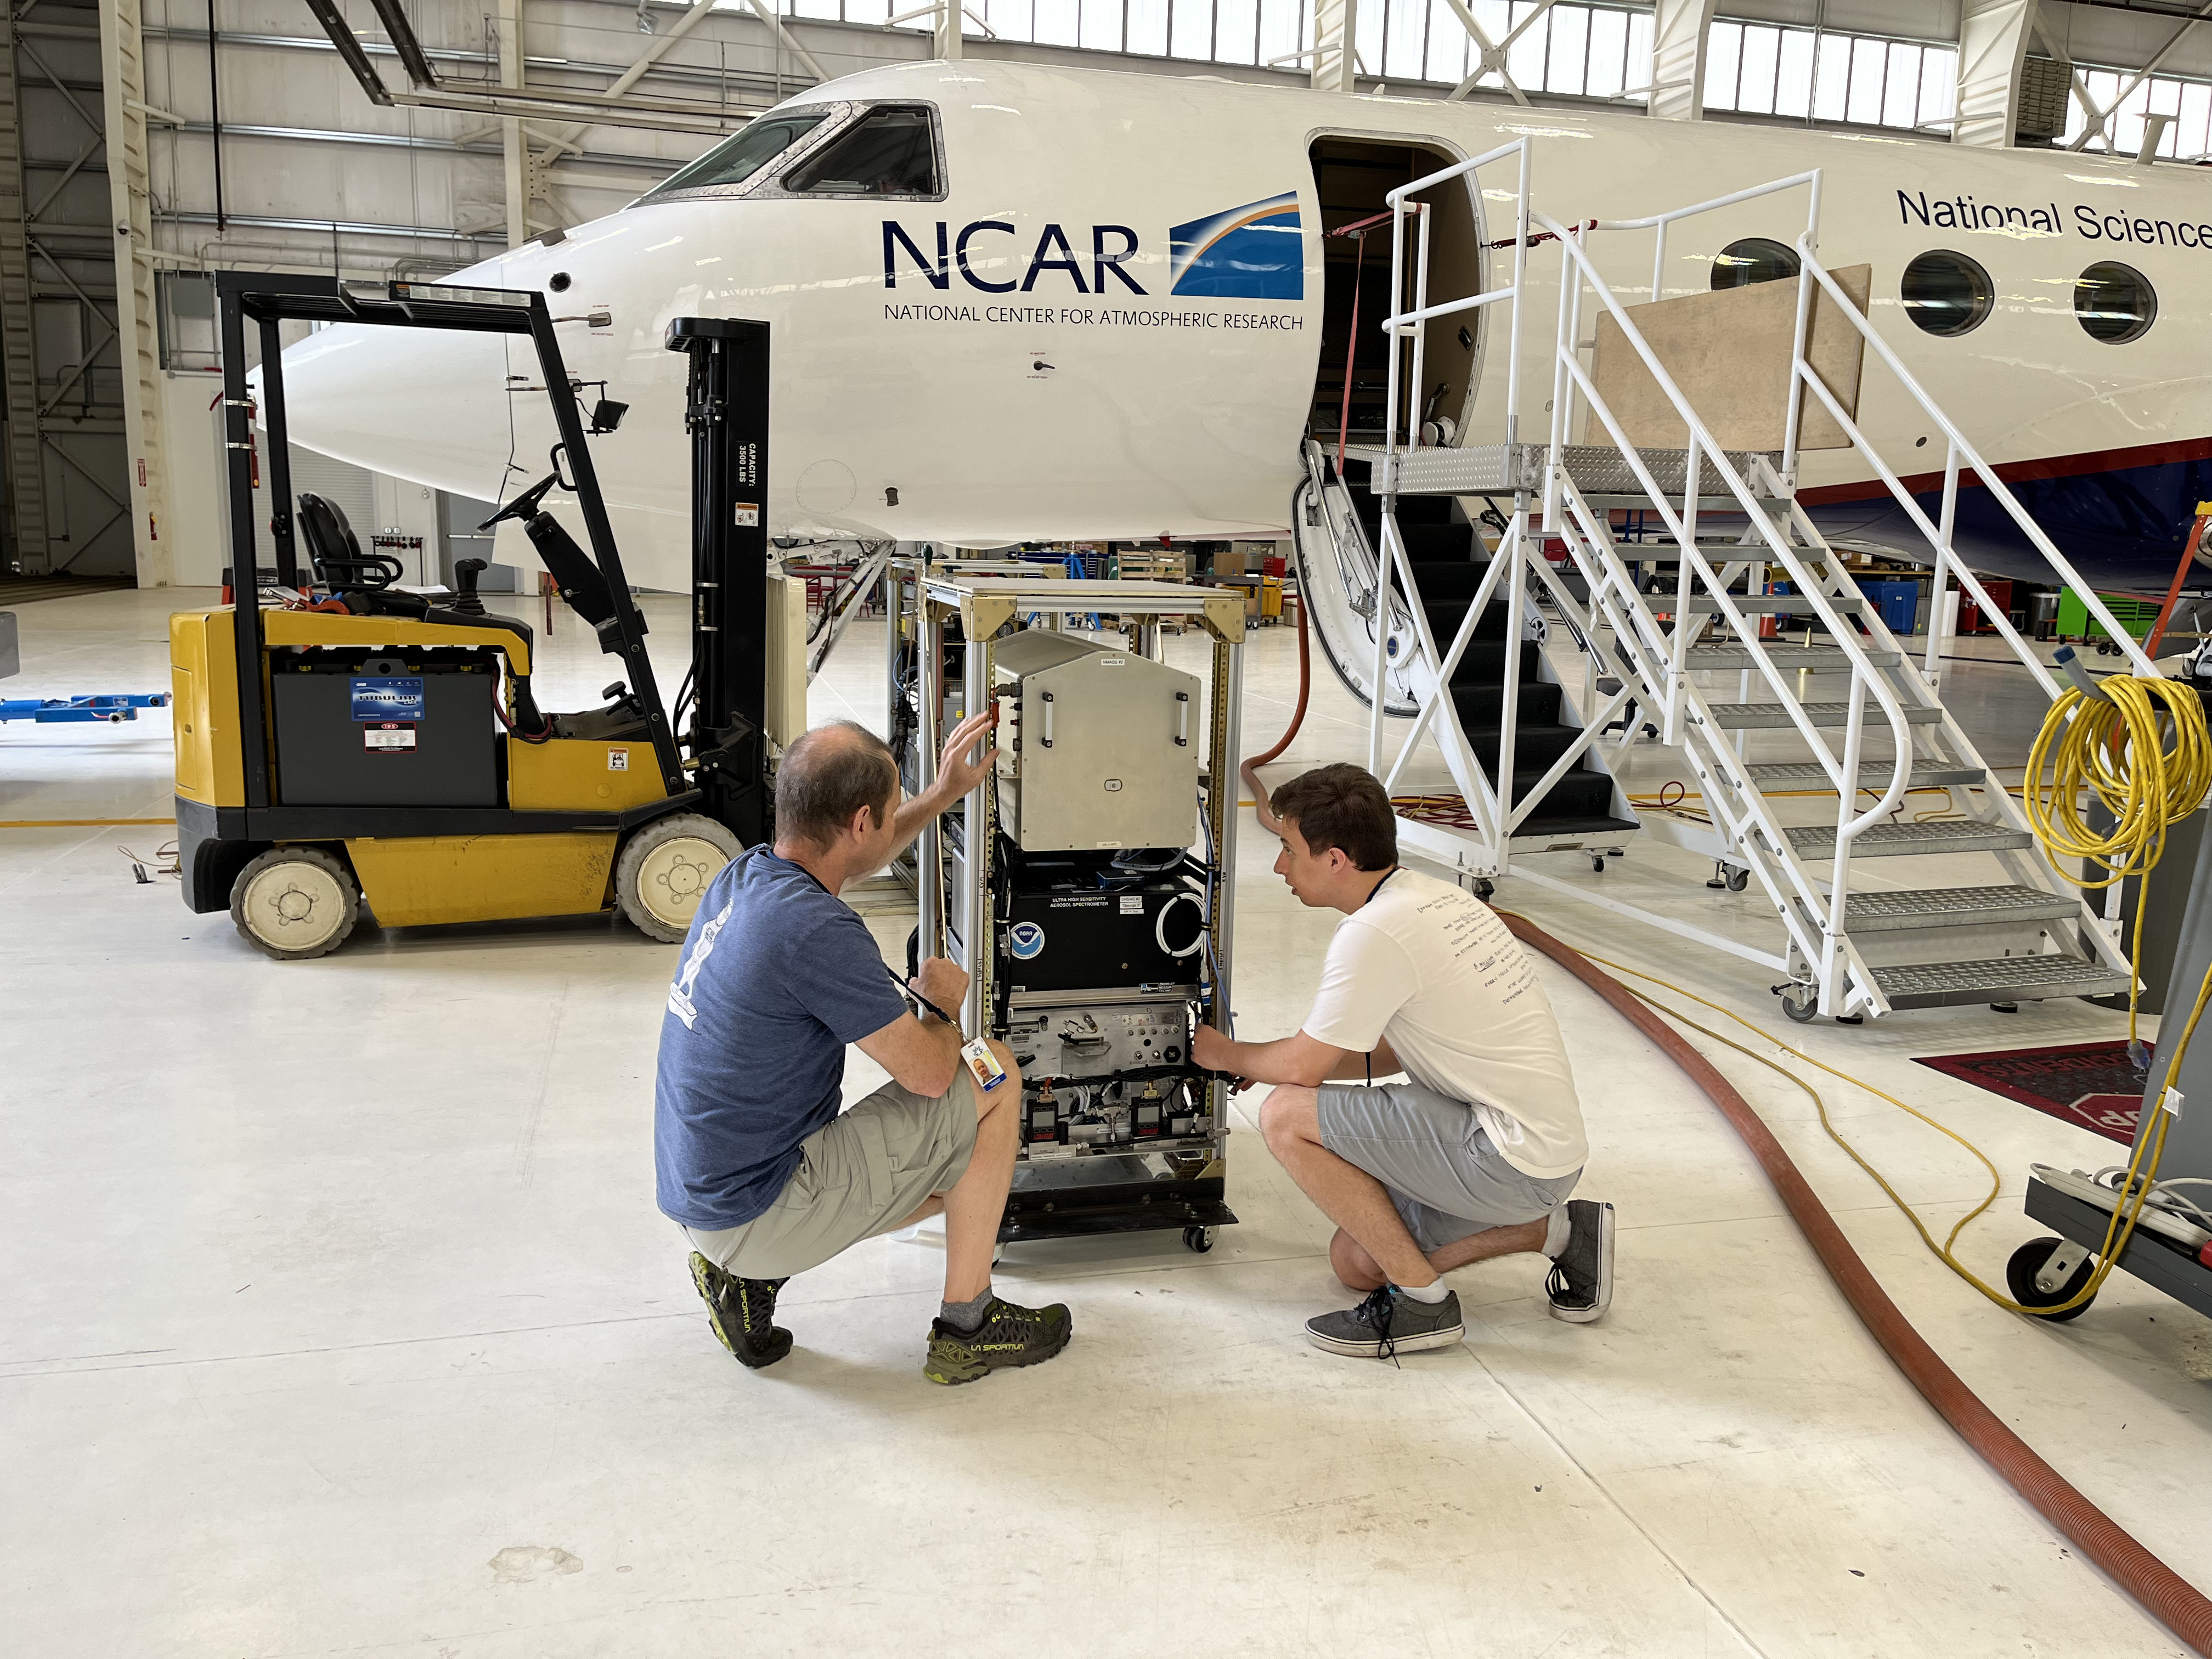 Preparing the GV research aircraft for ACCLIP.